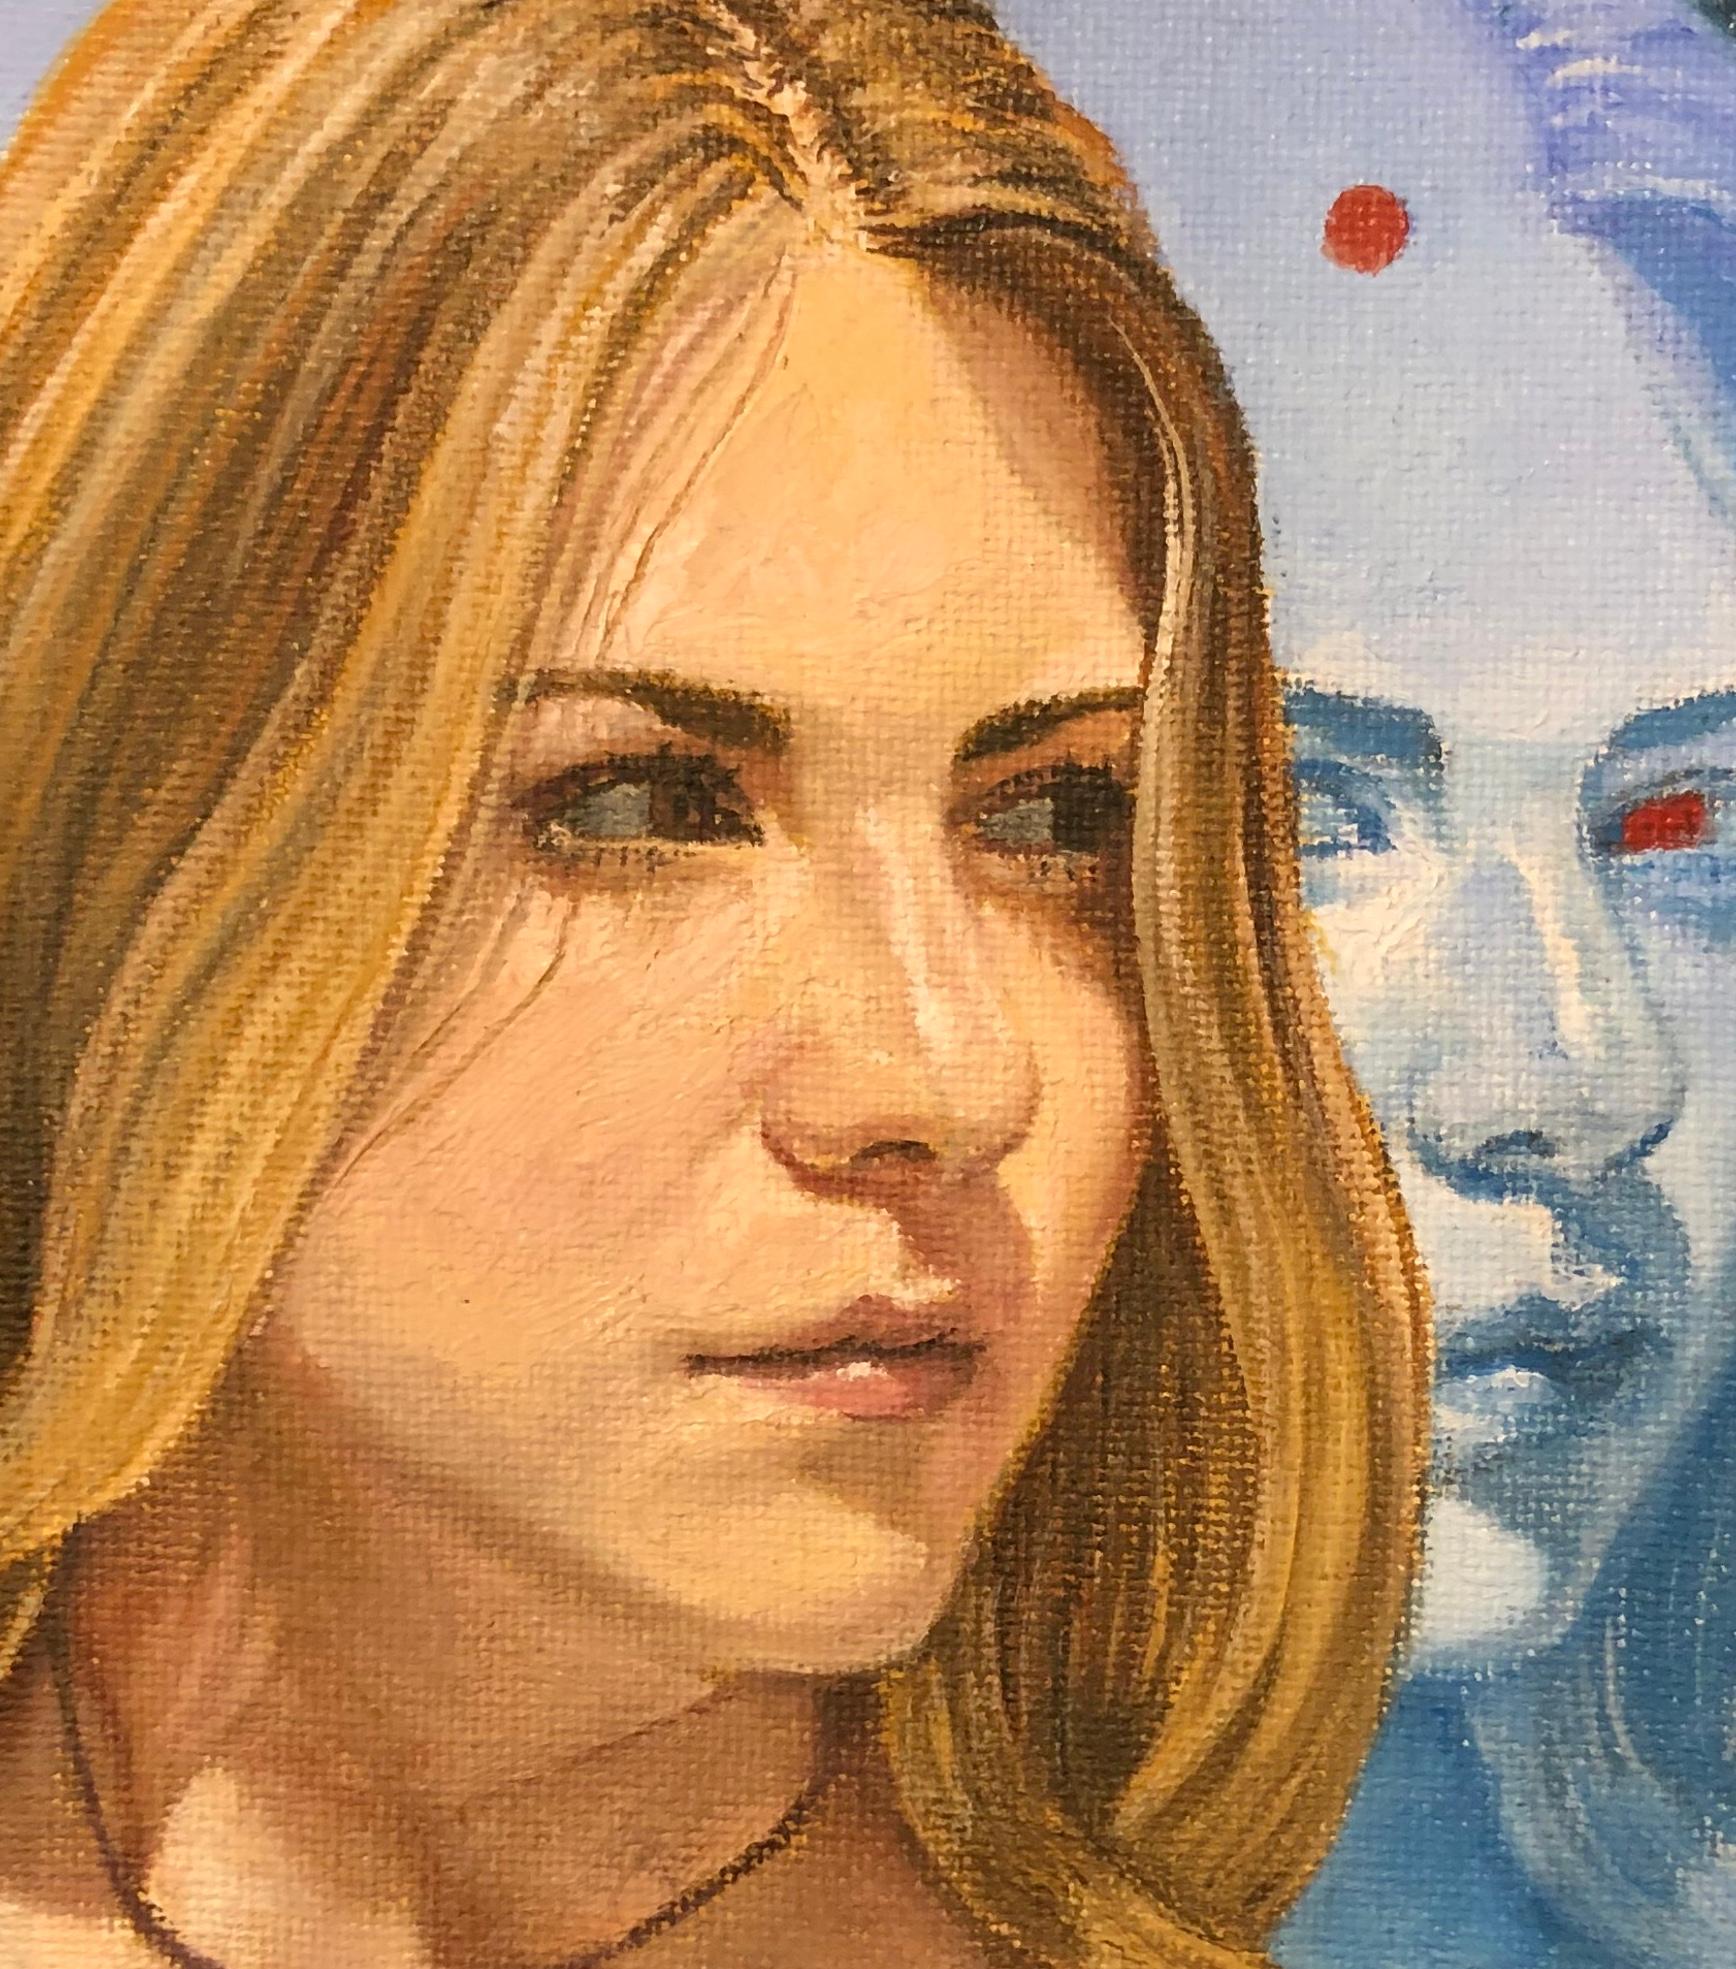 Study for Blue Face, Blond Female with Reflective Blue Face, Oil on Panel - Contemporary Painting by Juan Barragán